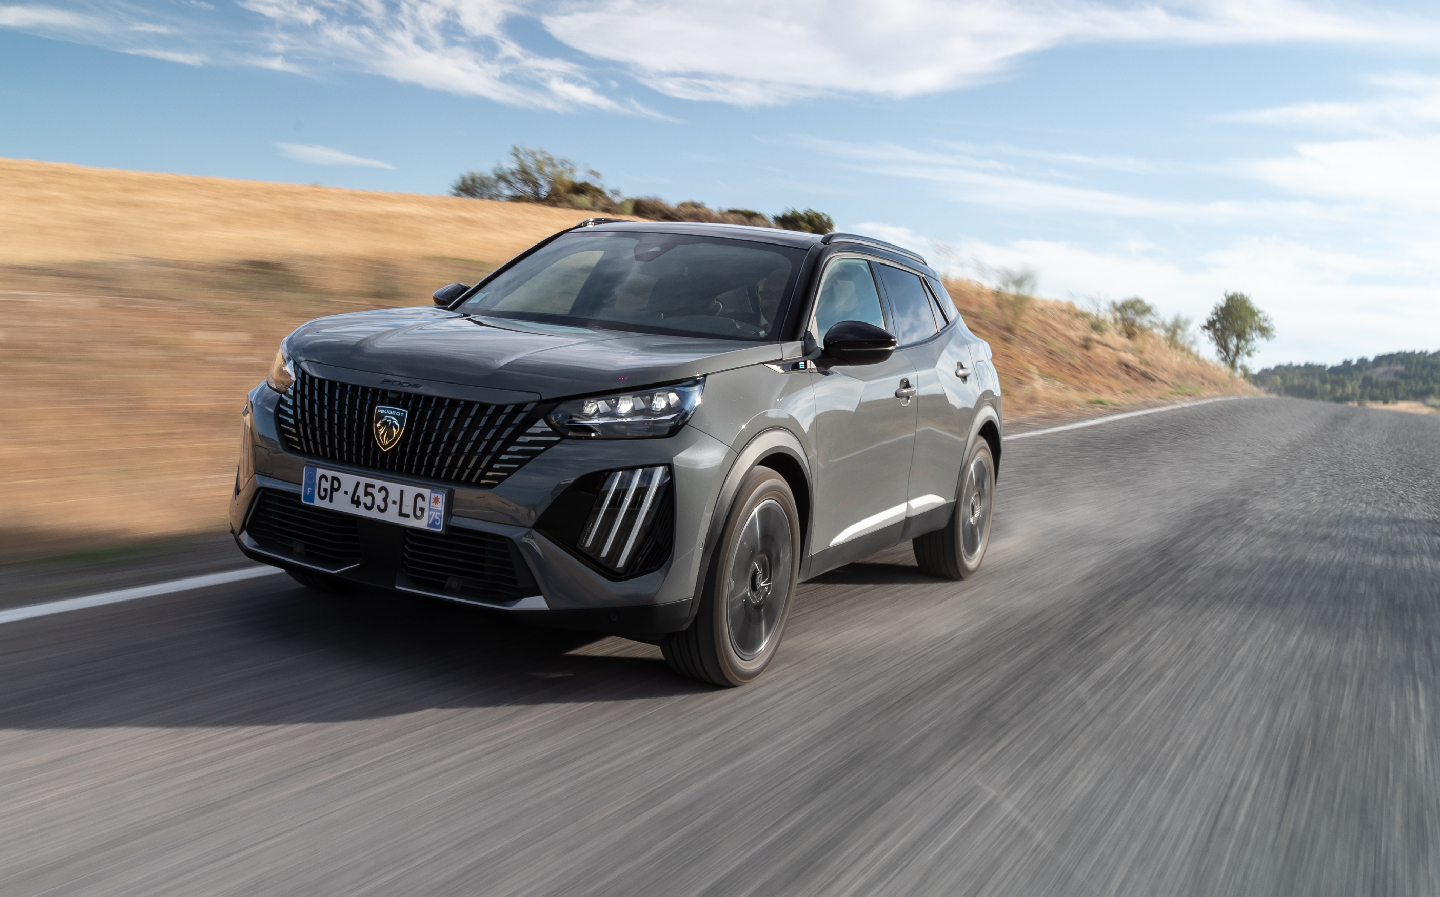 New Peugeot 2008 revealed: mid-life update for small SUV